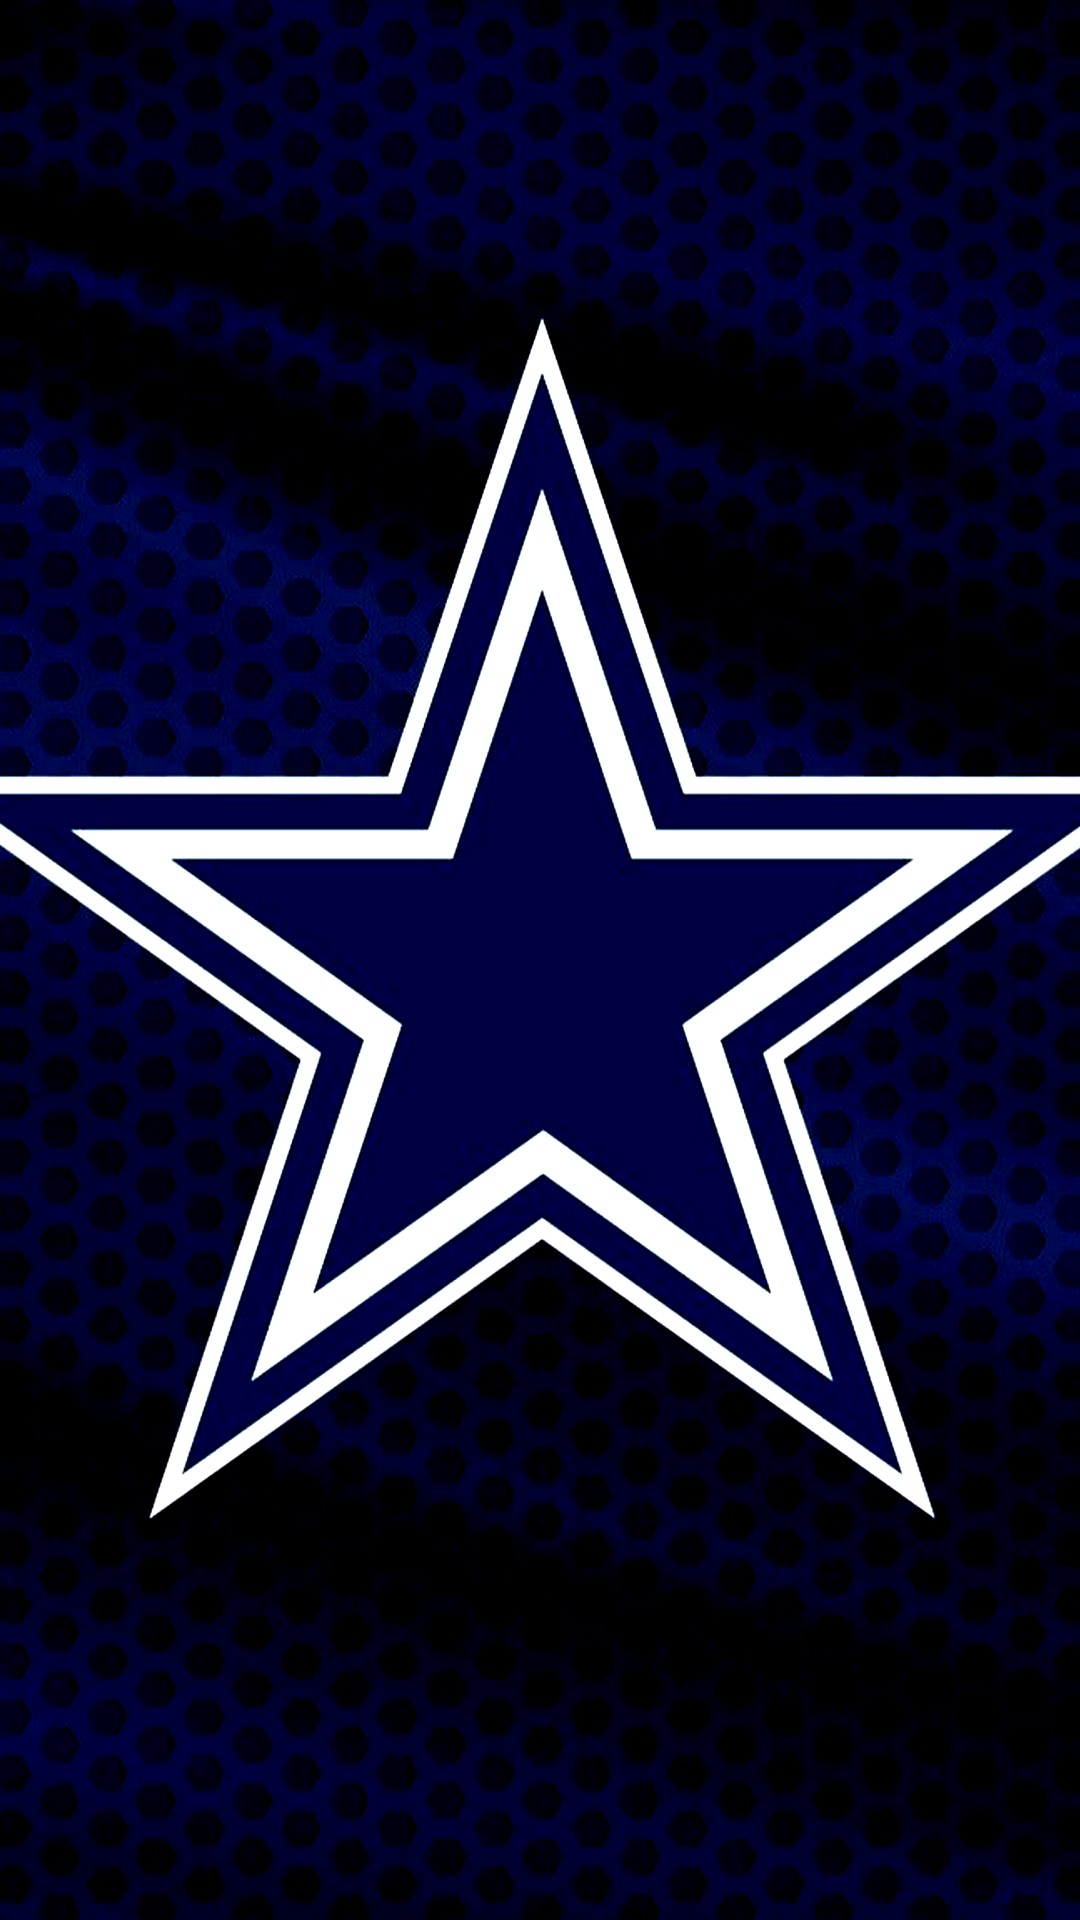 Wallpapers Phone Dallas Cowboys with high-resolution 1080x1920 pixel. You can use this wallpaper for your Android backgrounds, Tablet, Samsung Screensavers, Mobile Phone Lock Screen and another Smartphones device